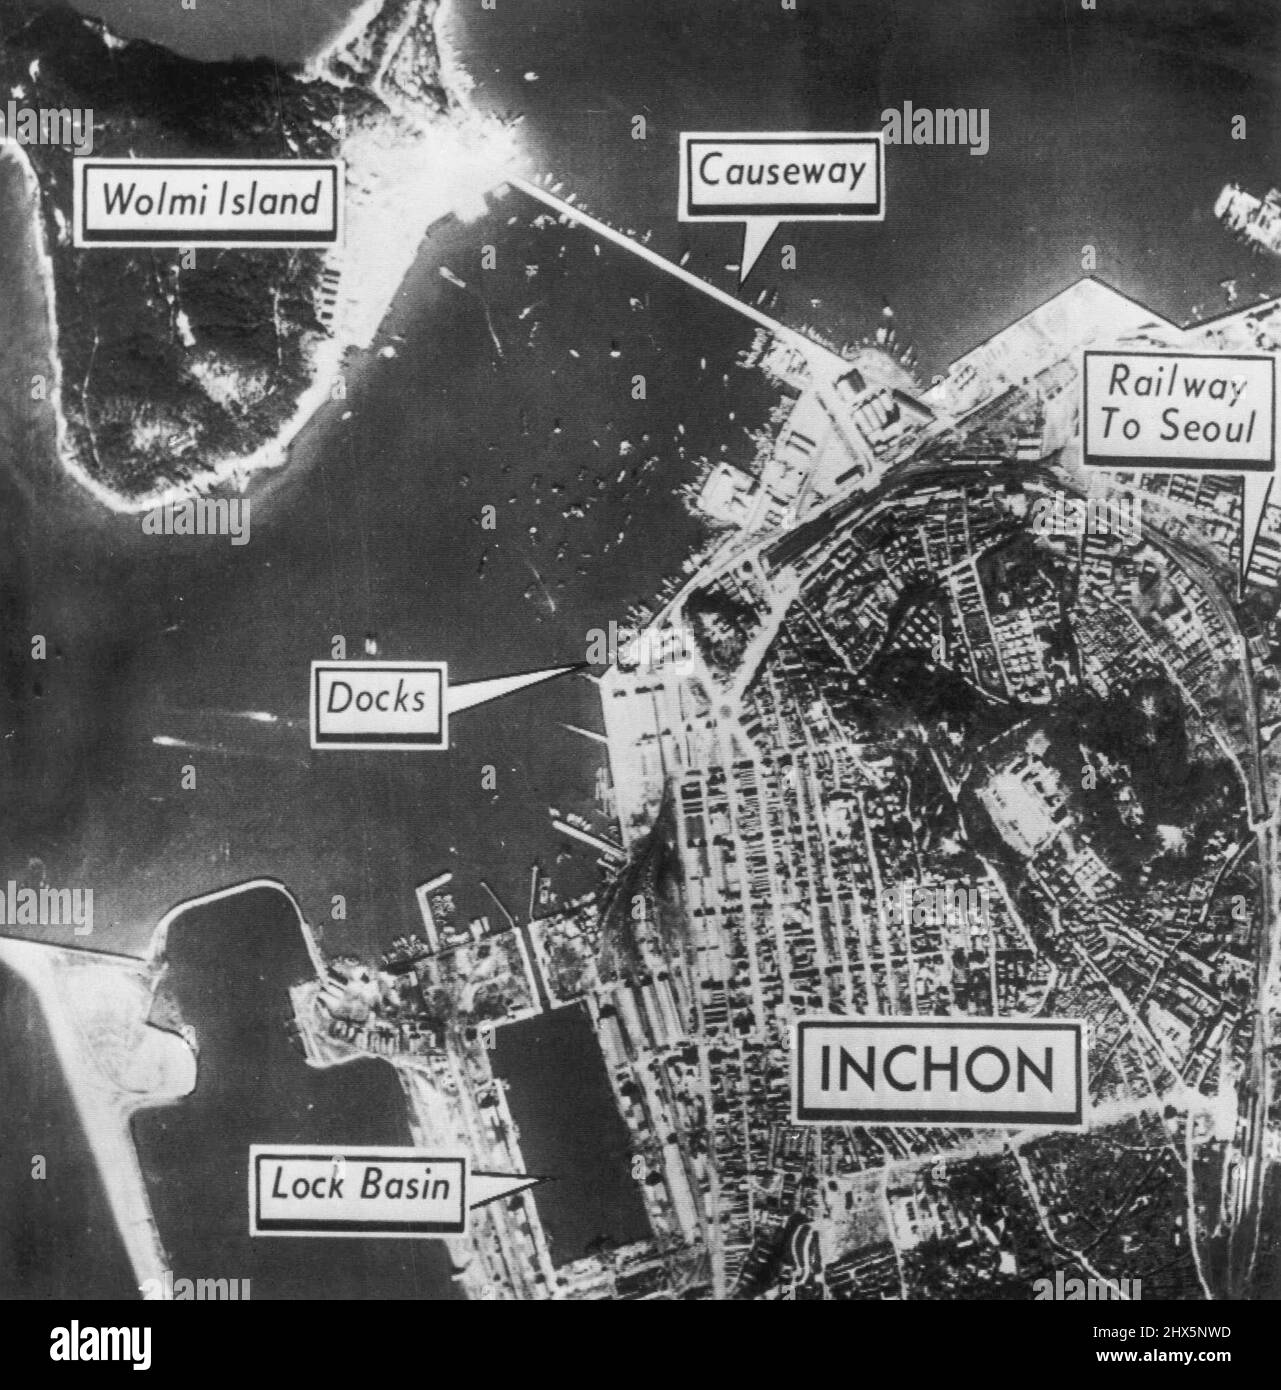 Diagram of Inchon Invasion Area - Aerial photo-diagram shows allied invasion area of Inchon and Wolmi Island on west coast of South Korea. The Island is connected to the city by a causeway. The city's port facilities are back in operation and in use by allied forces. Invasion forces quickly pushed through Inchon against light North Korean opposition and today were fighting in suburbs of Seoul--Red-held South Korean capital--22 miles inland. September 16, 1950. (Photo by AP Wirephoto). Stock Photo